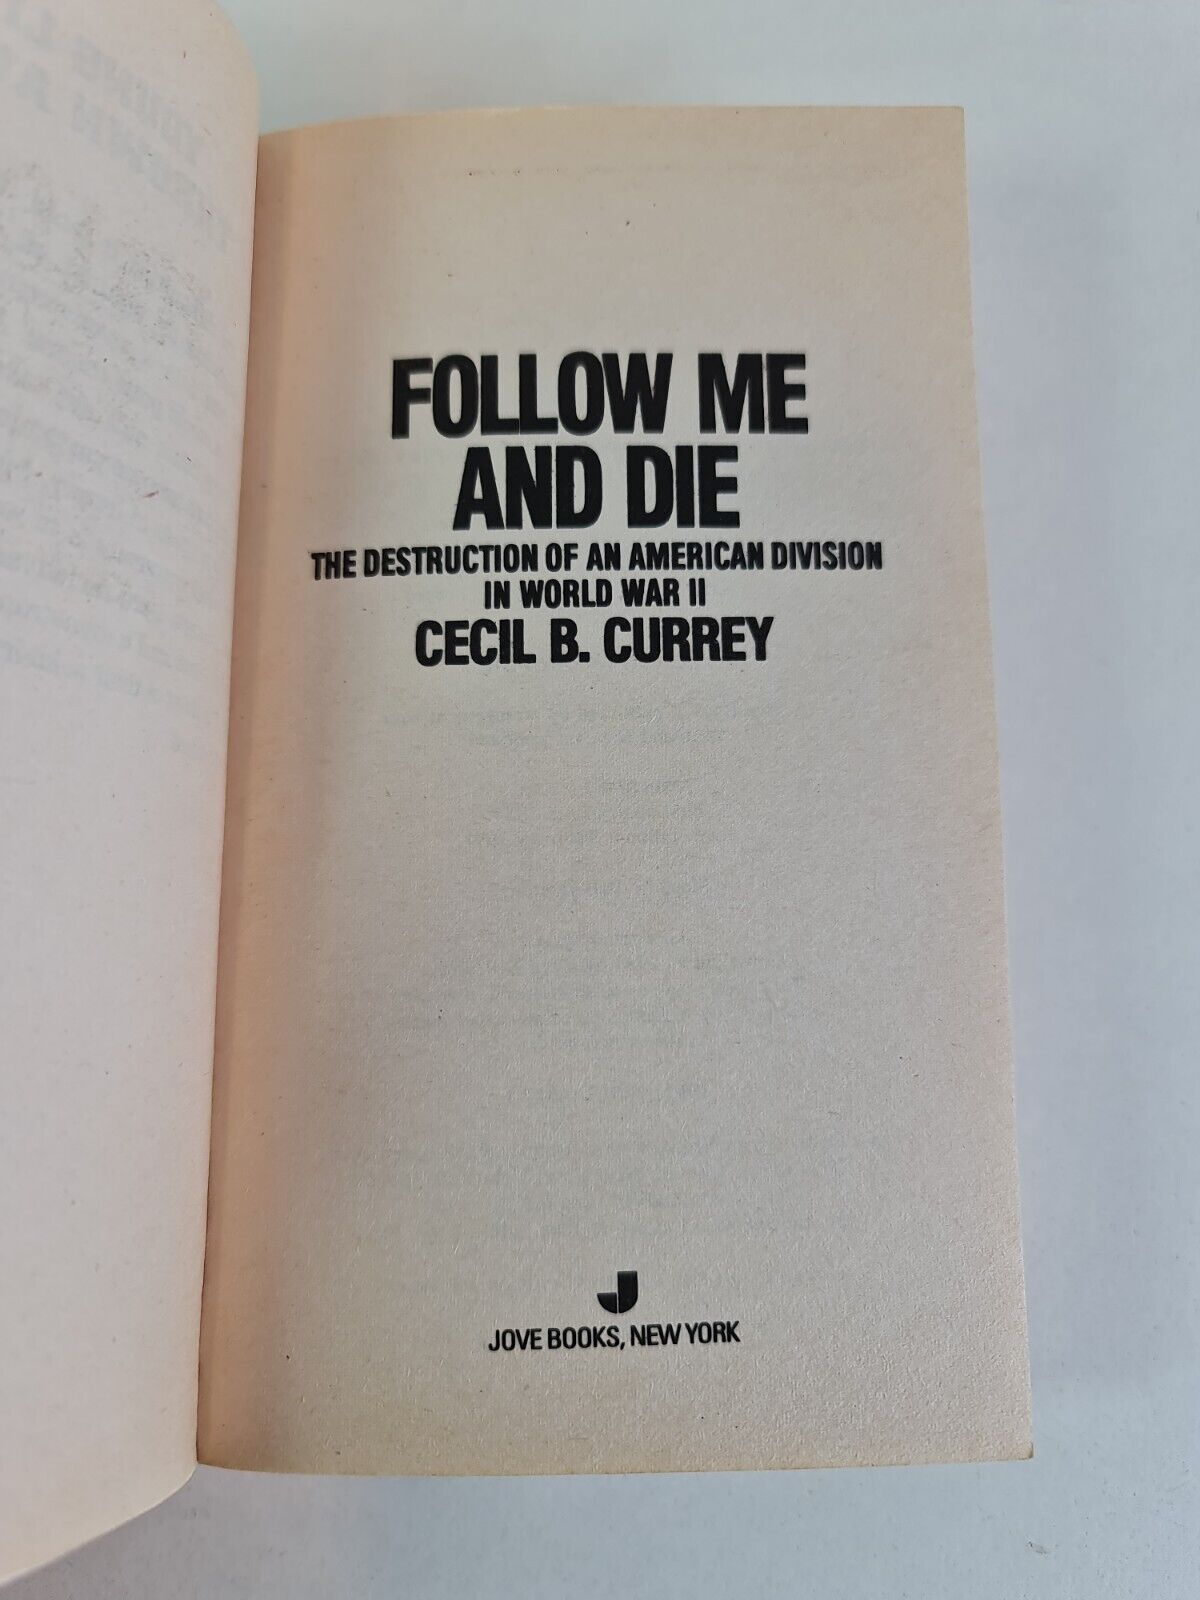 Follow Me and Die by Cecil Barr Currey (1991)